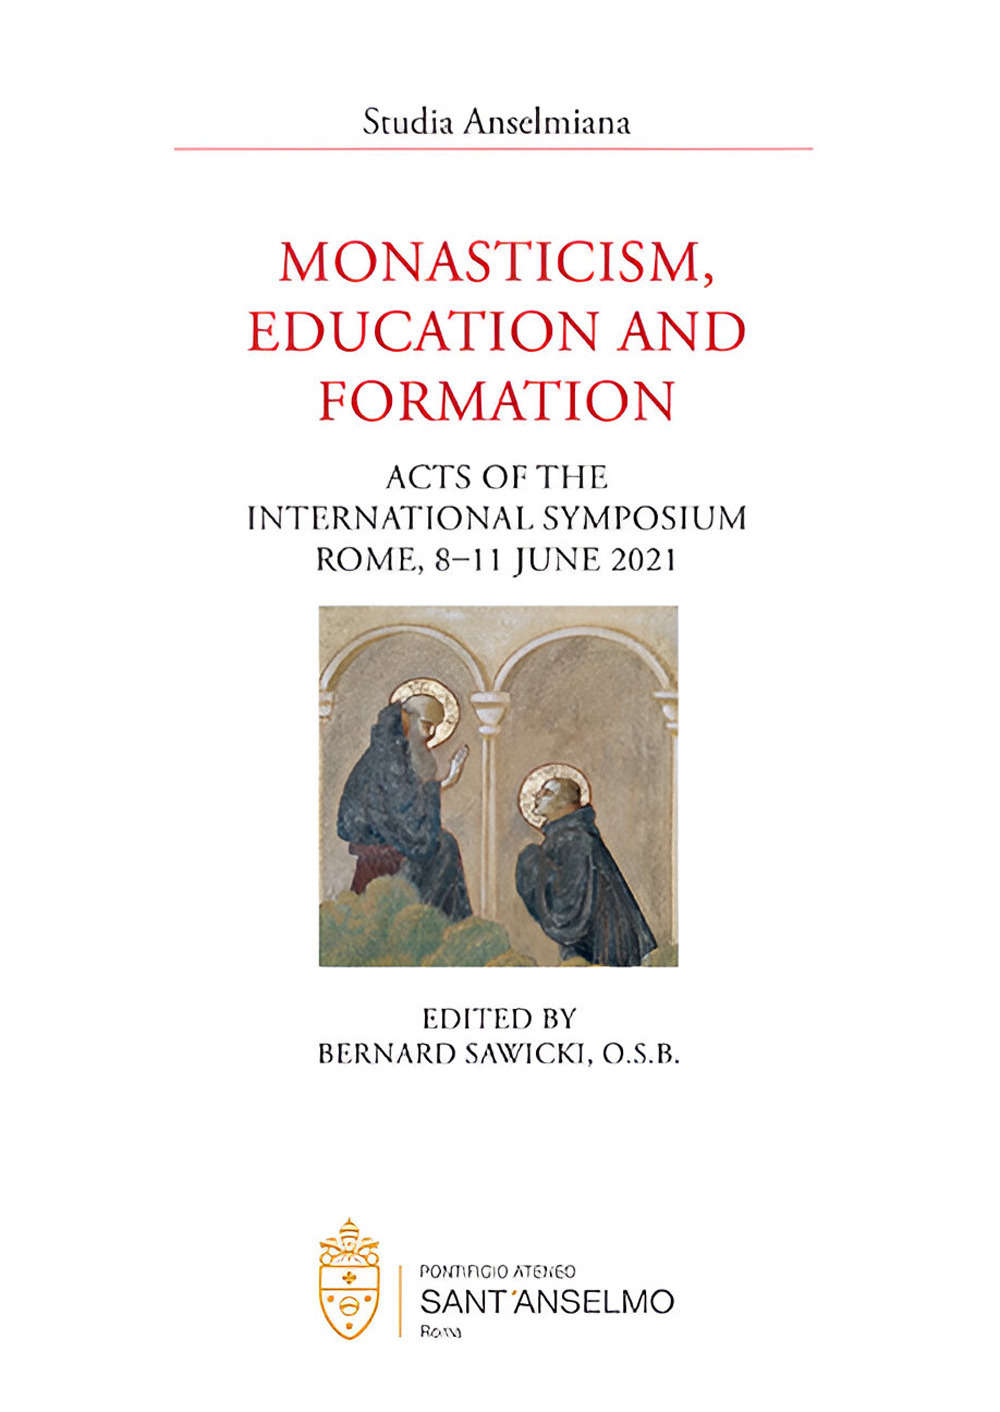 Monasticism, education and formation (Acts of the International Symposium, Rome, 8-11 June 2021)